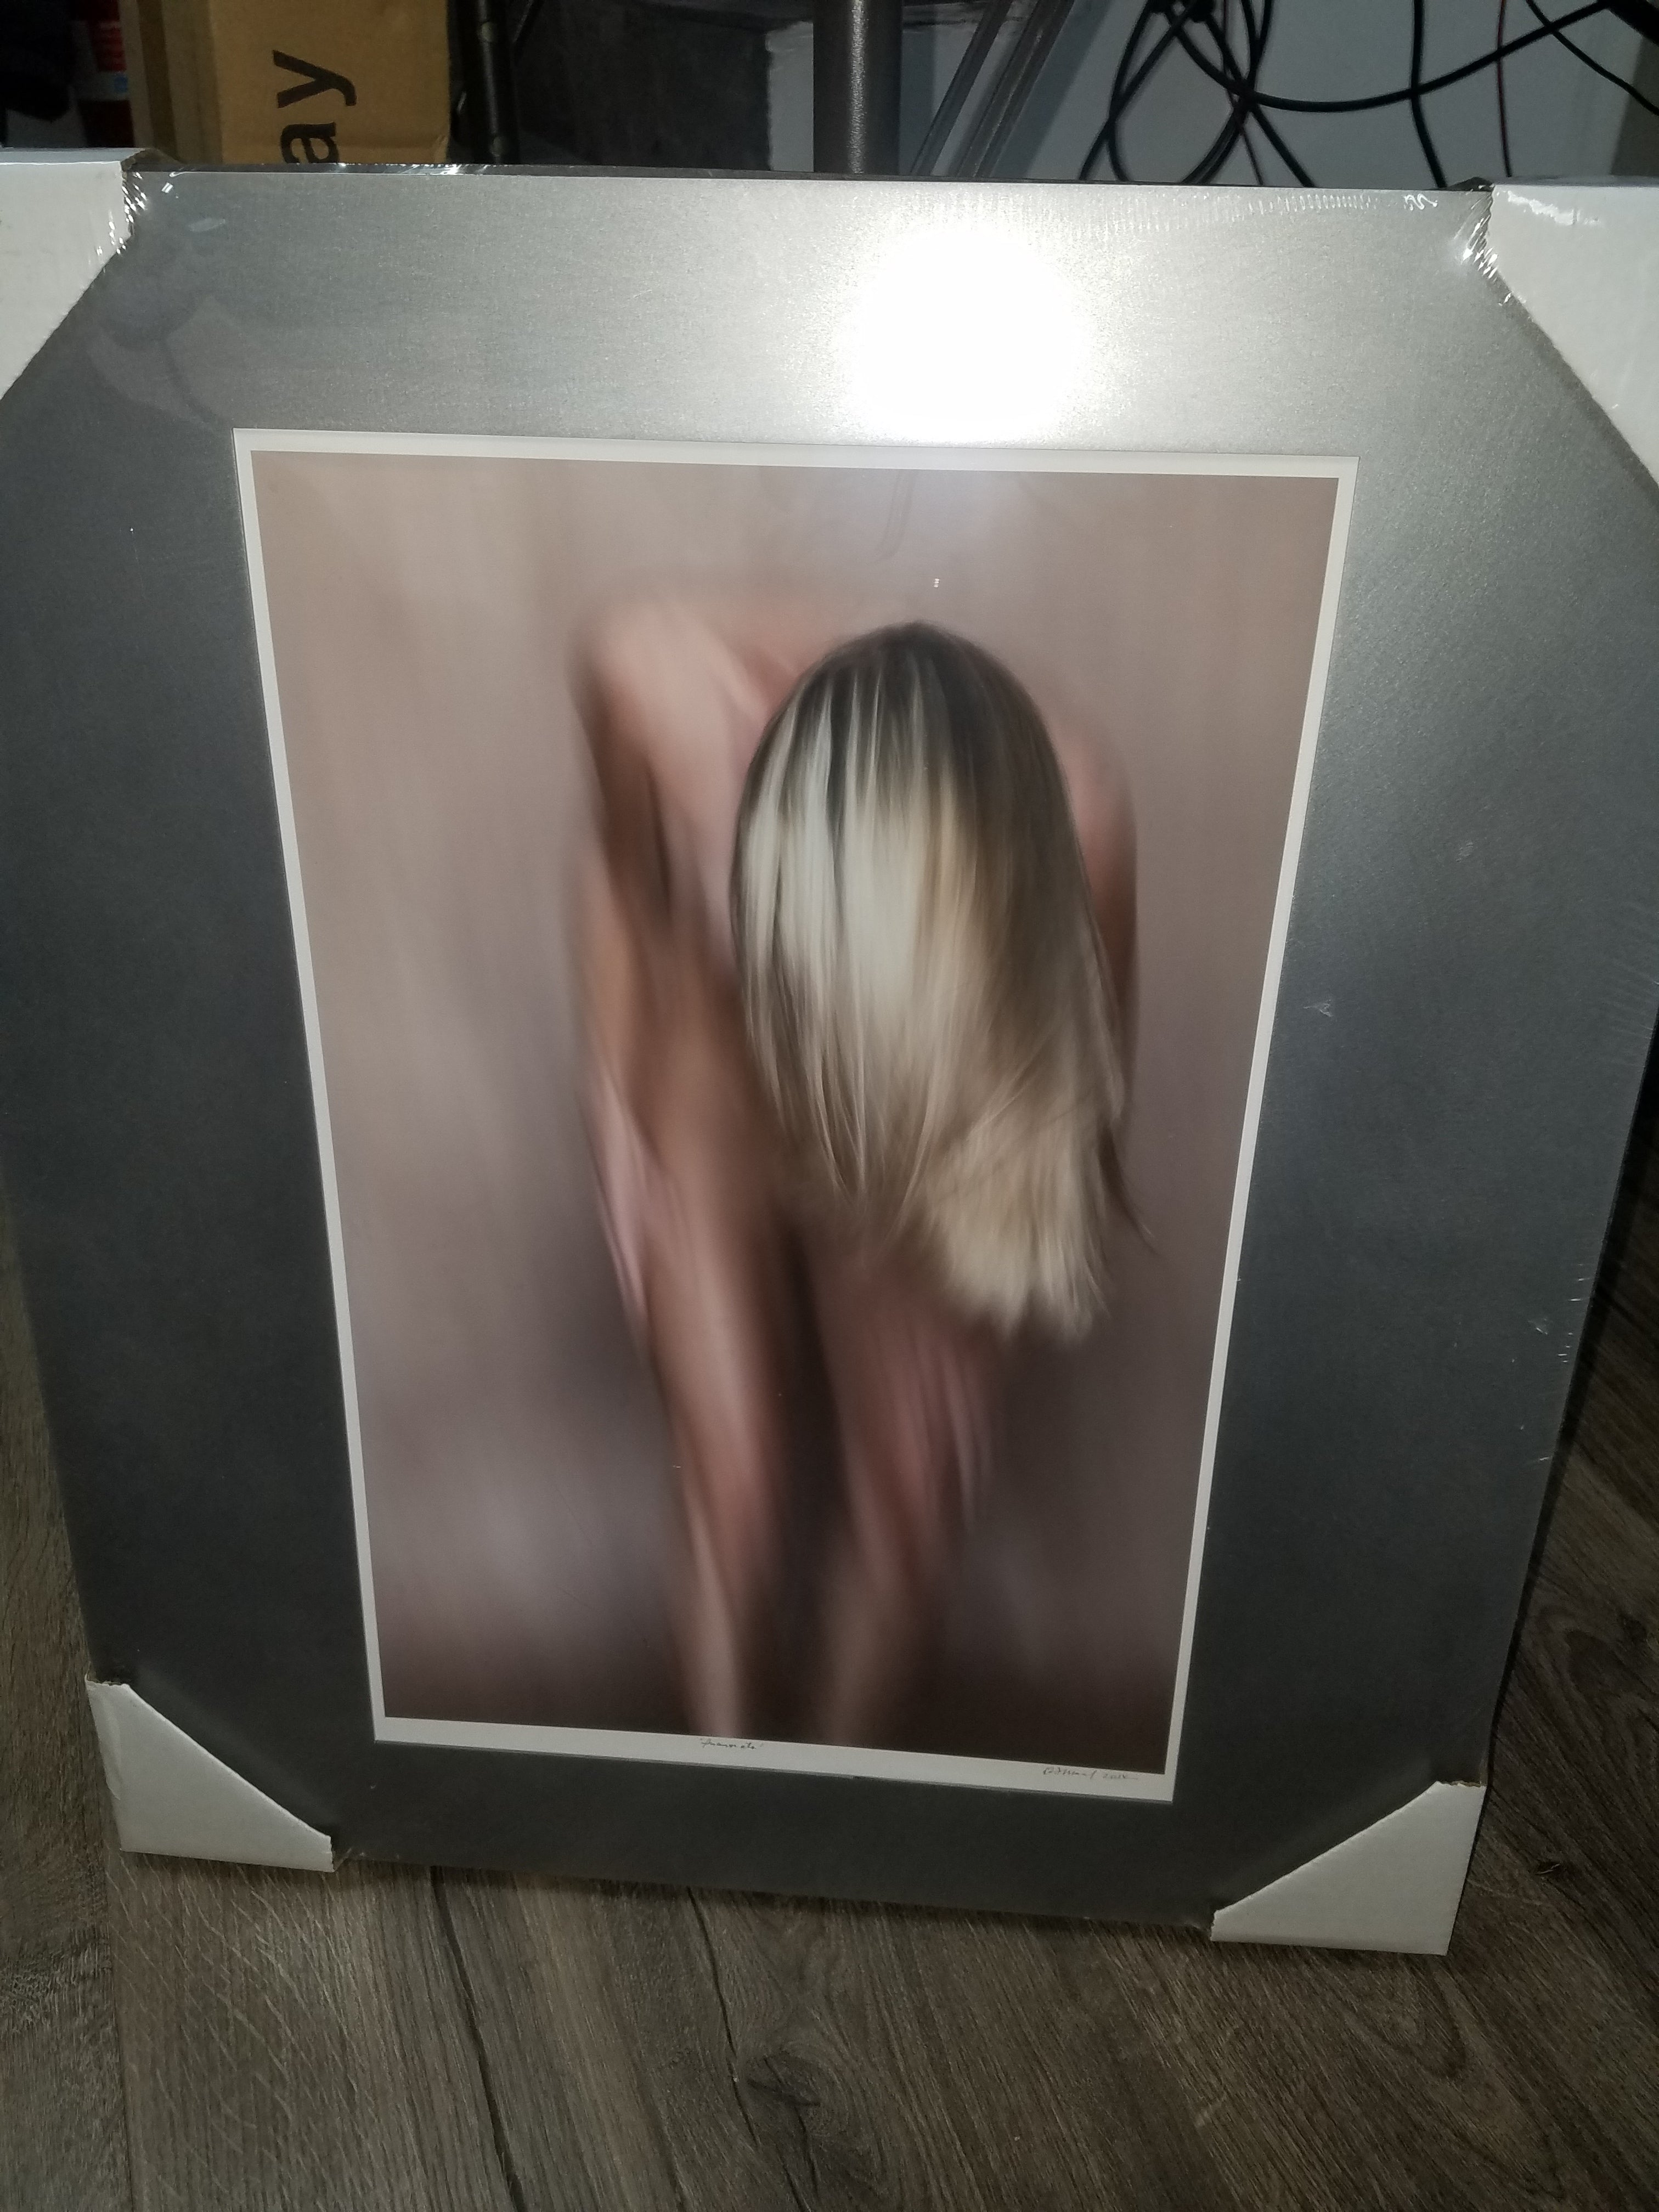 NOTES:  Still in the plastic  Framed and ready to hang in excellent condition  Nude Woman Naked Art from 2014  Artist Unknown  Frame measures 22" x 25"  In house and ready to ship!